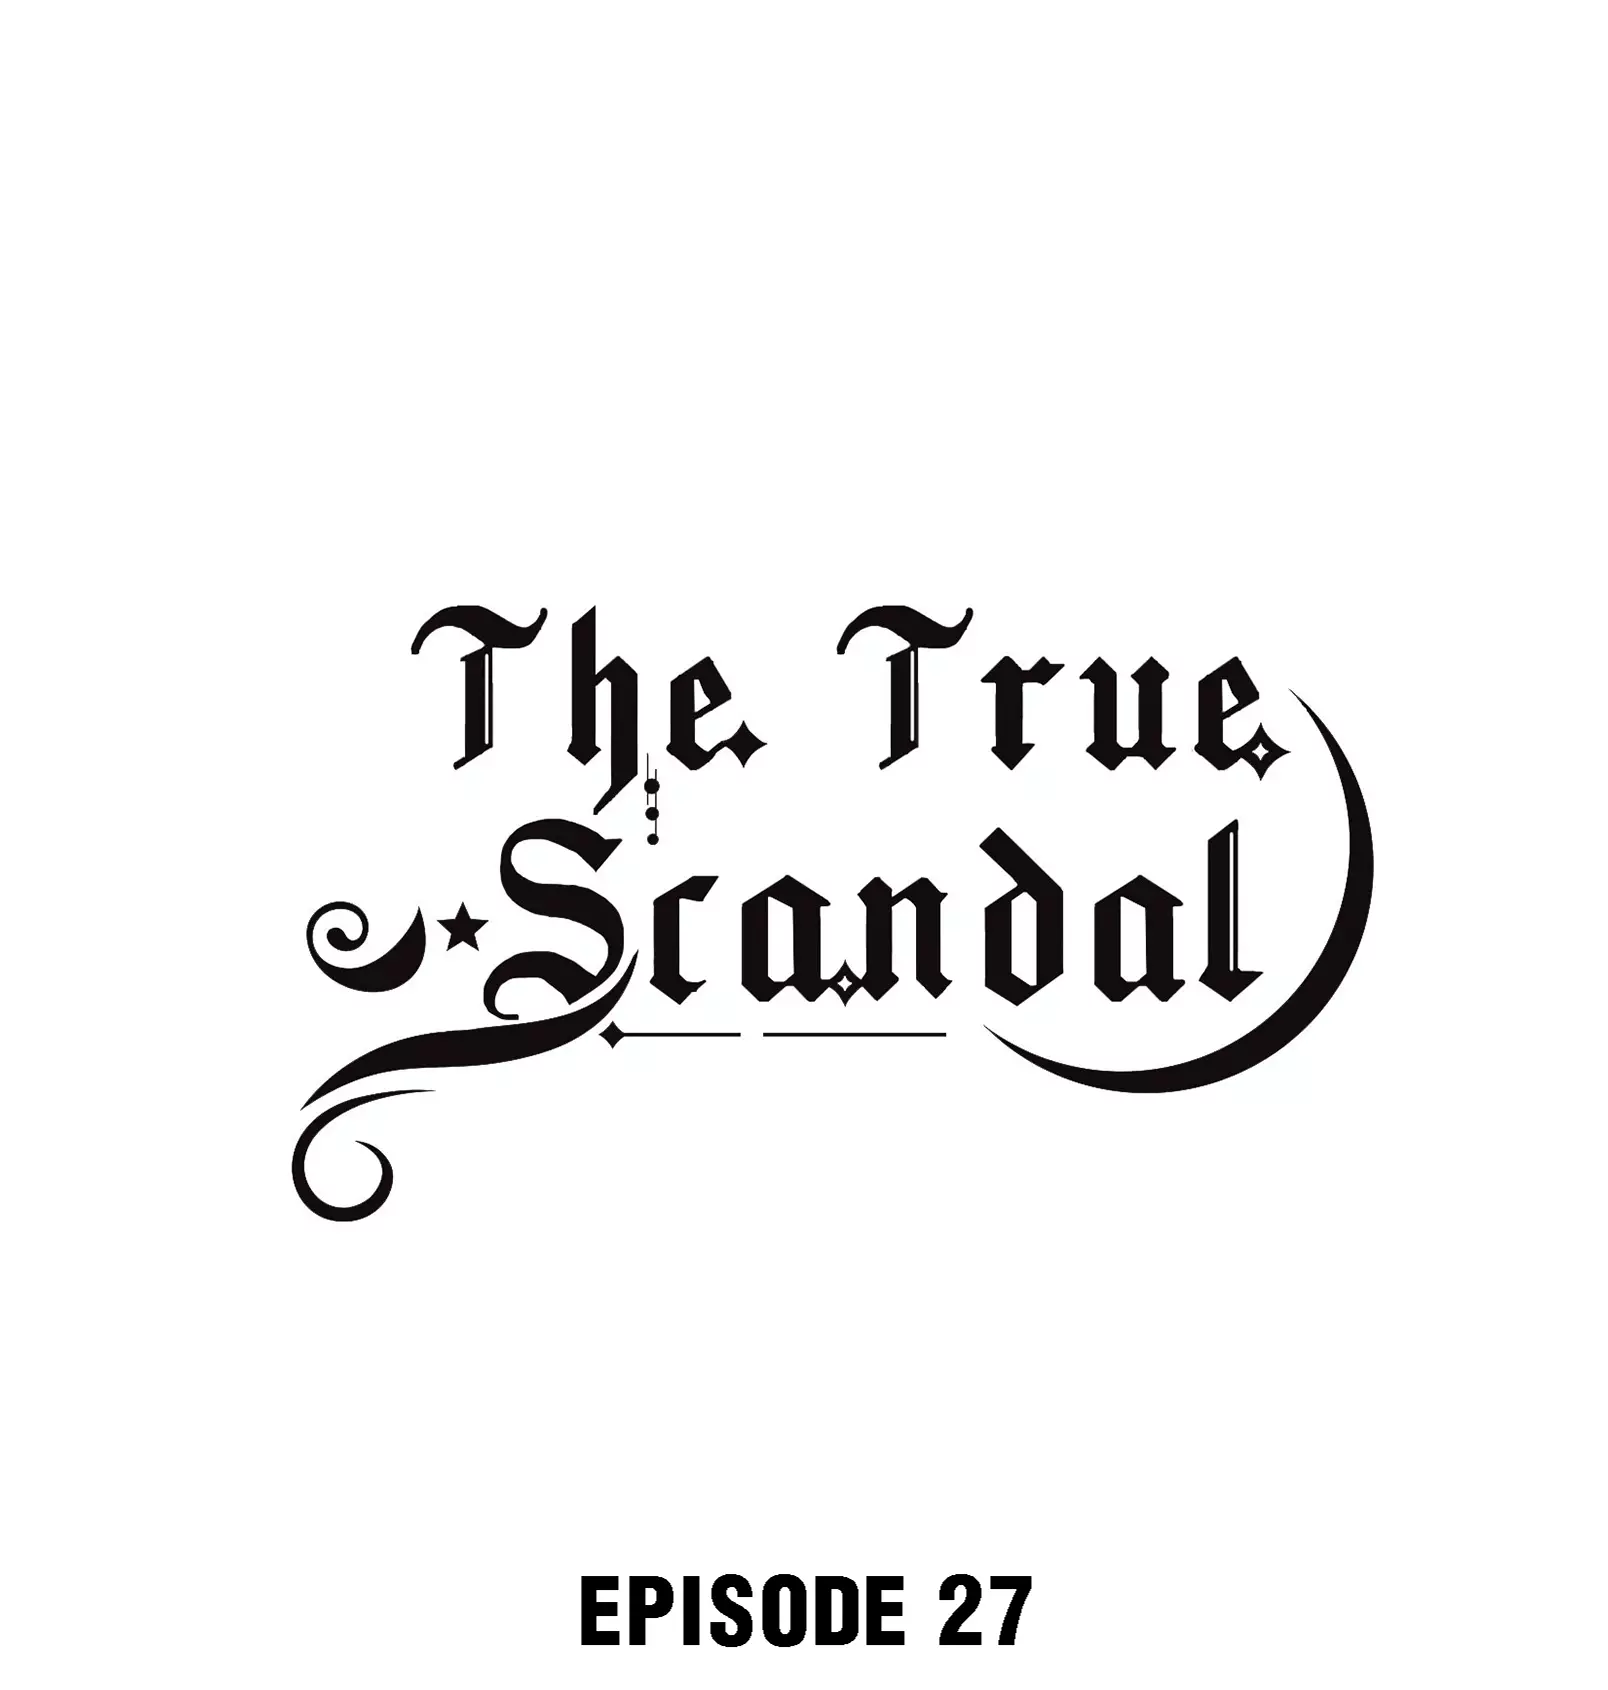 The True Scandal - 27 page 1-32425d70